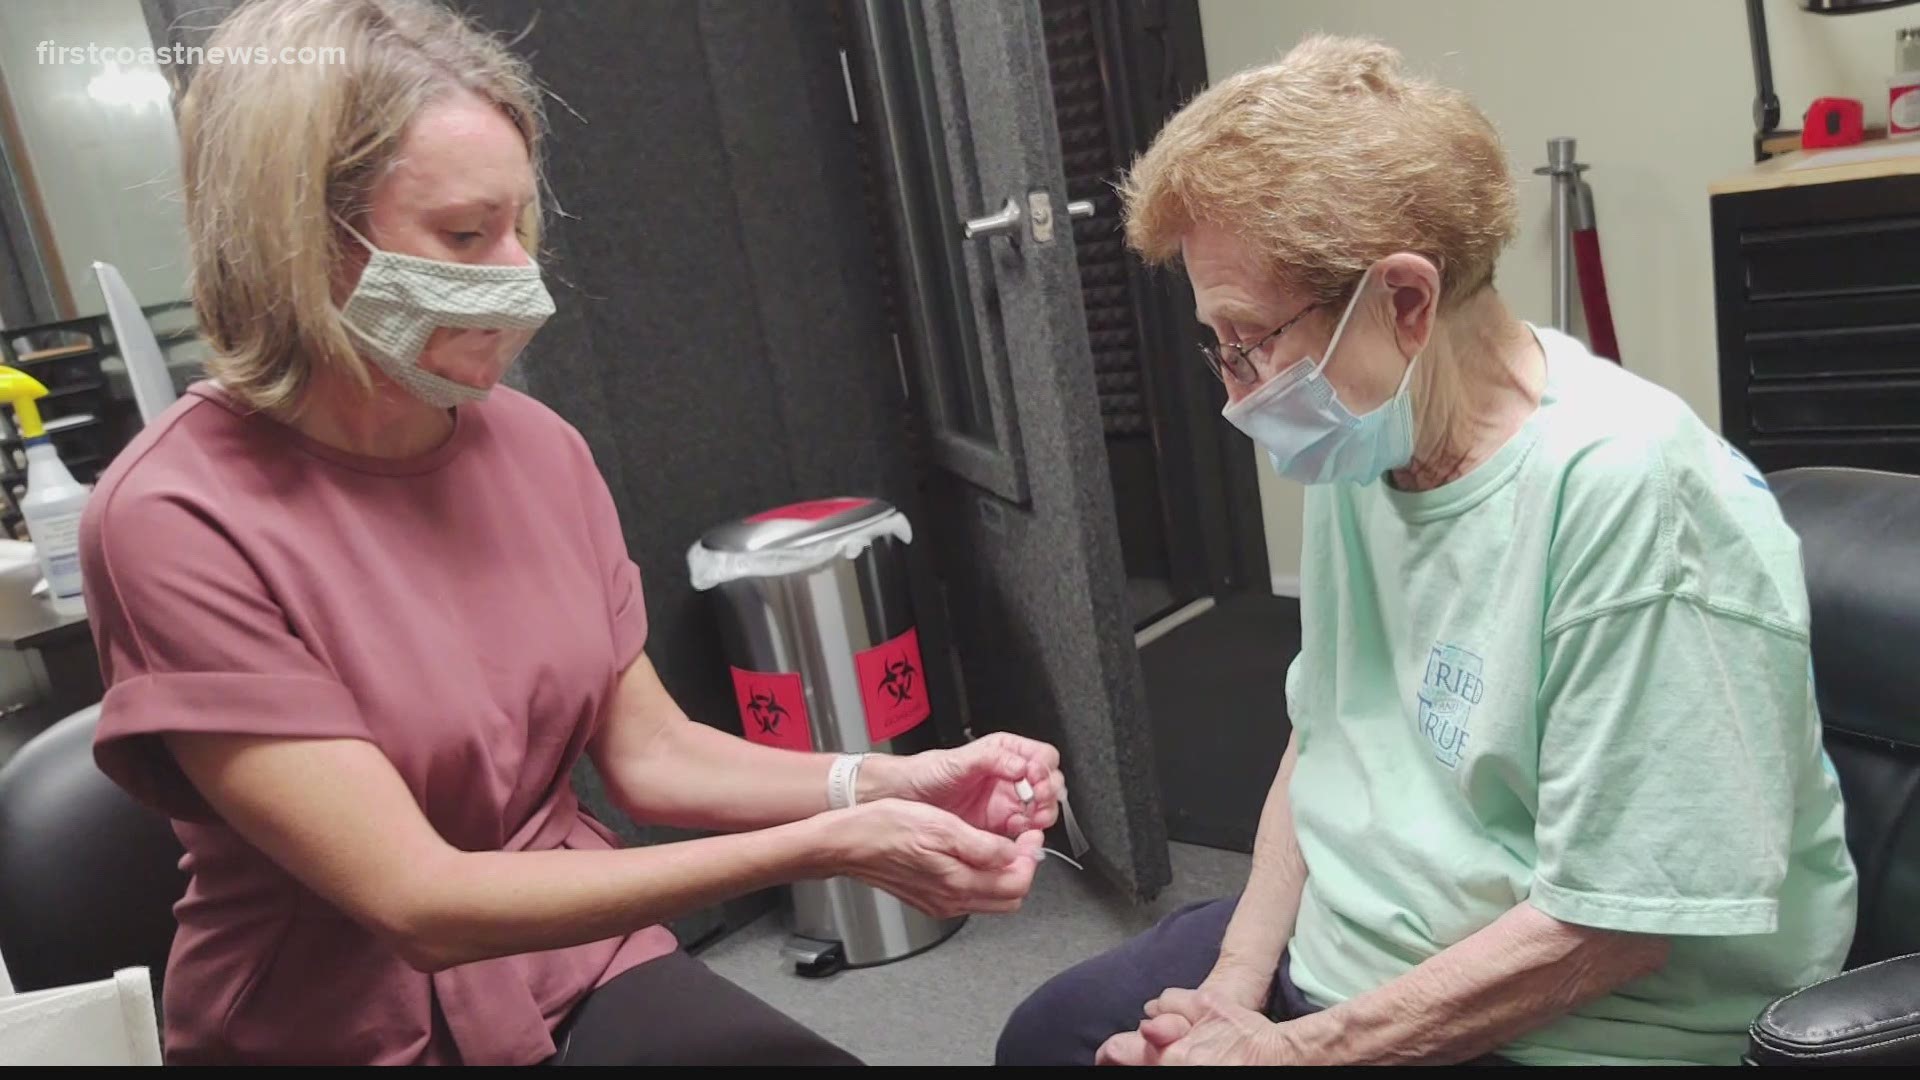 The Arlington Lions Club and its nonprofit clinic Lend An Ear covered the cost of new hearing aids for Virginia Steinke after her old ones were destroyed.